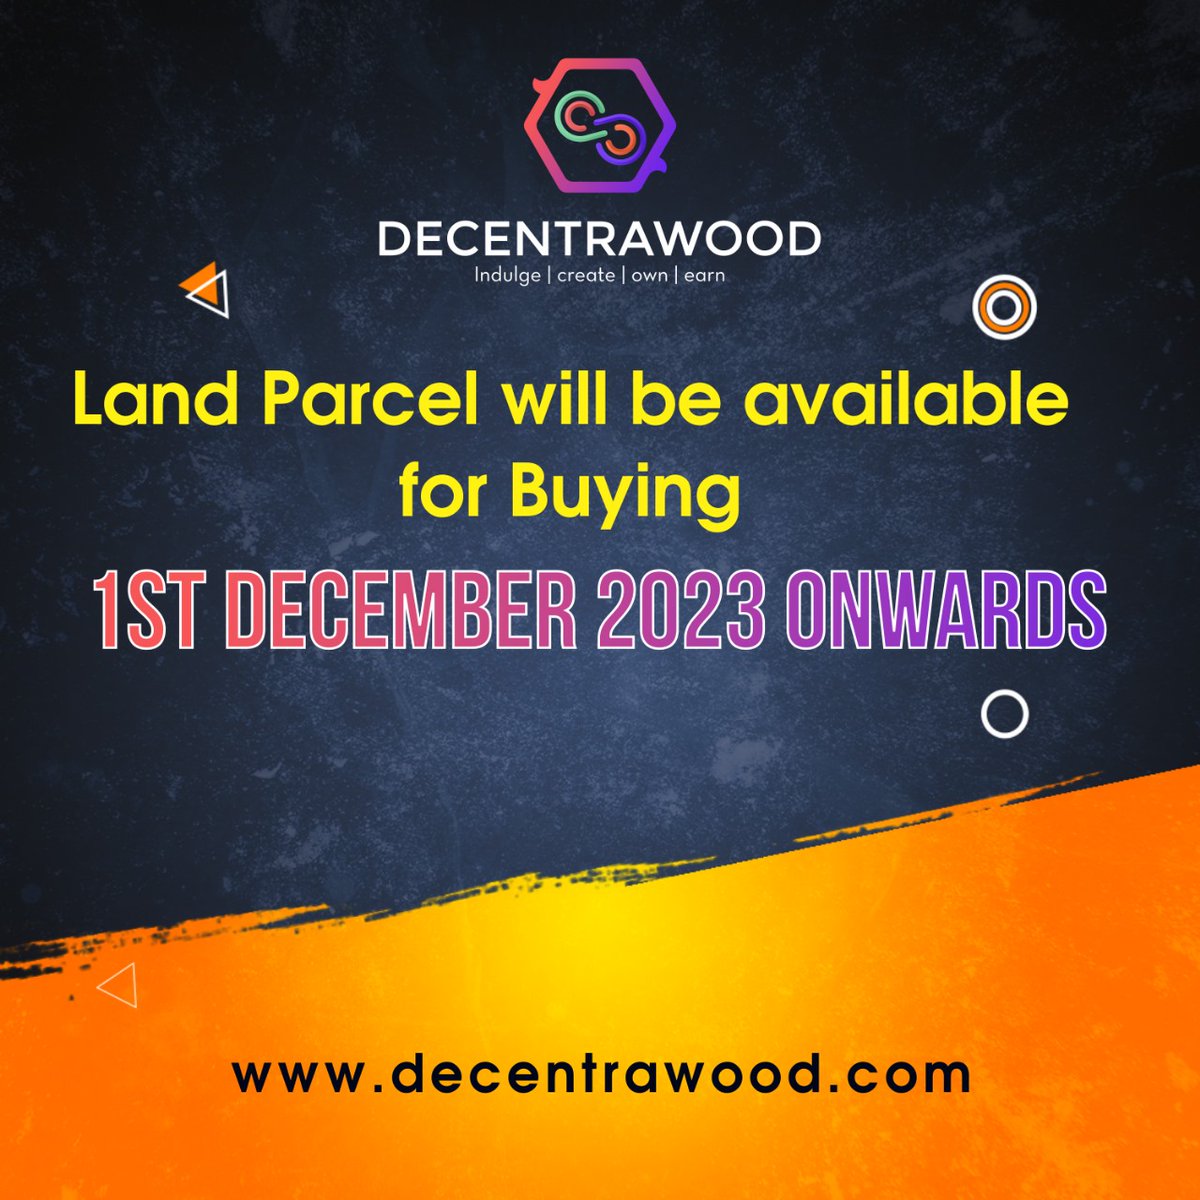 *Mark your calendars! A prestigious land parcel will be opening for purchase on December 1st, 2023.* 

*Get ready to secure your piece of paradise and make your dreams come true. 🗓️🌅*

#Decentrawood #spiritualzone #ZONE #VirtualReality #explore #opening #landparcel